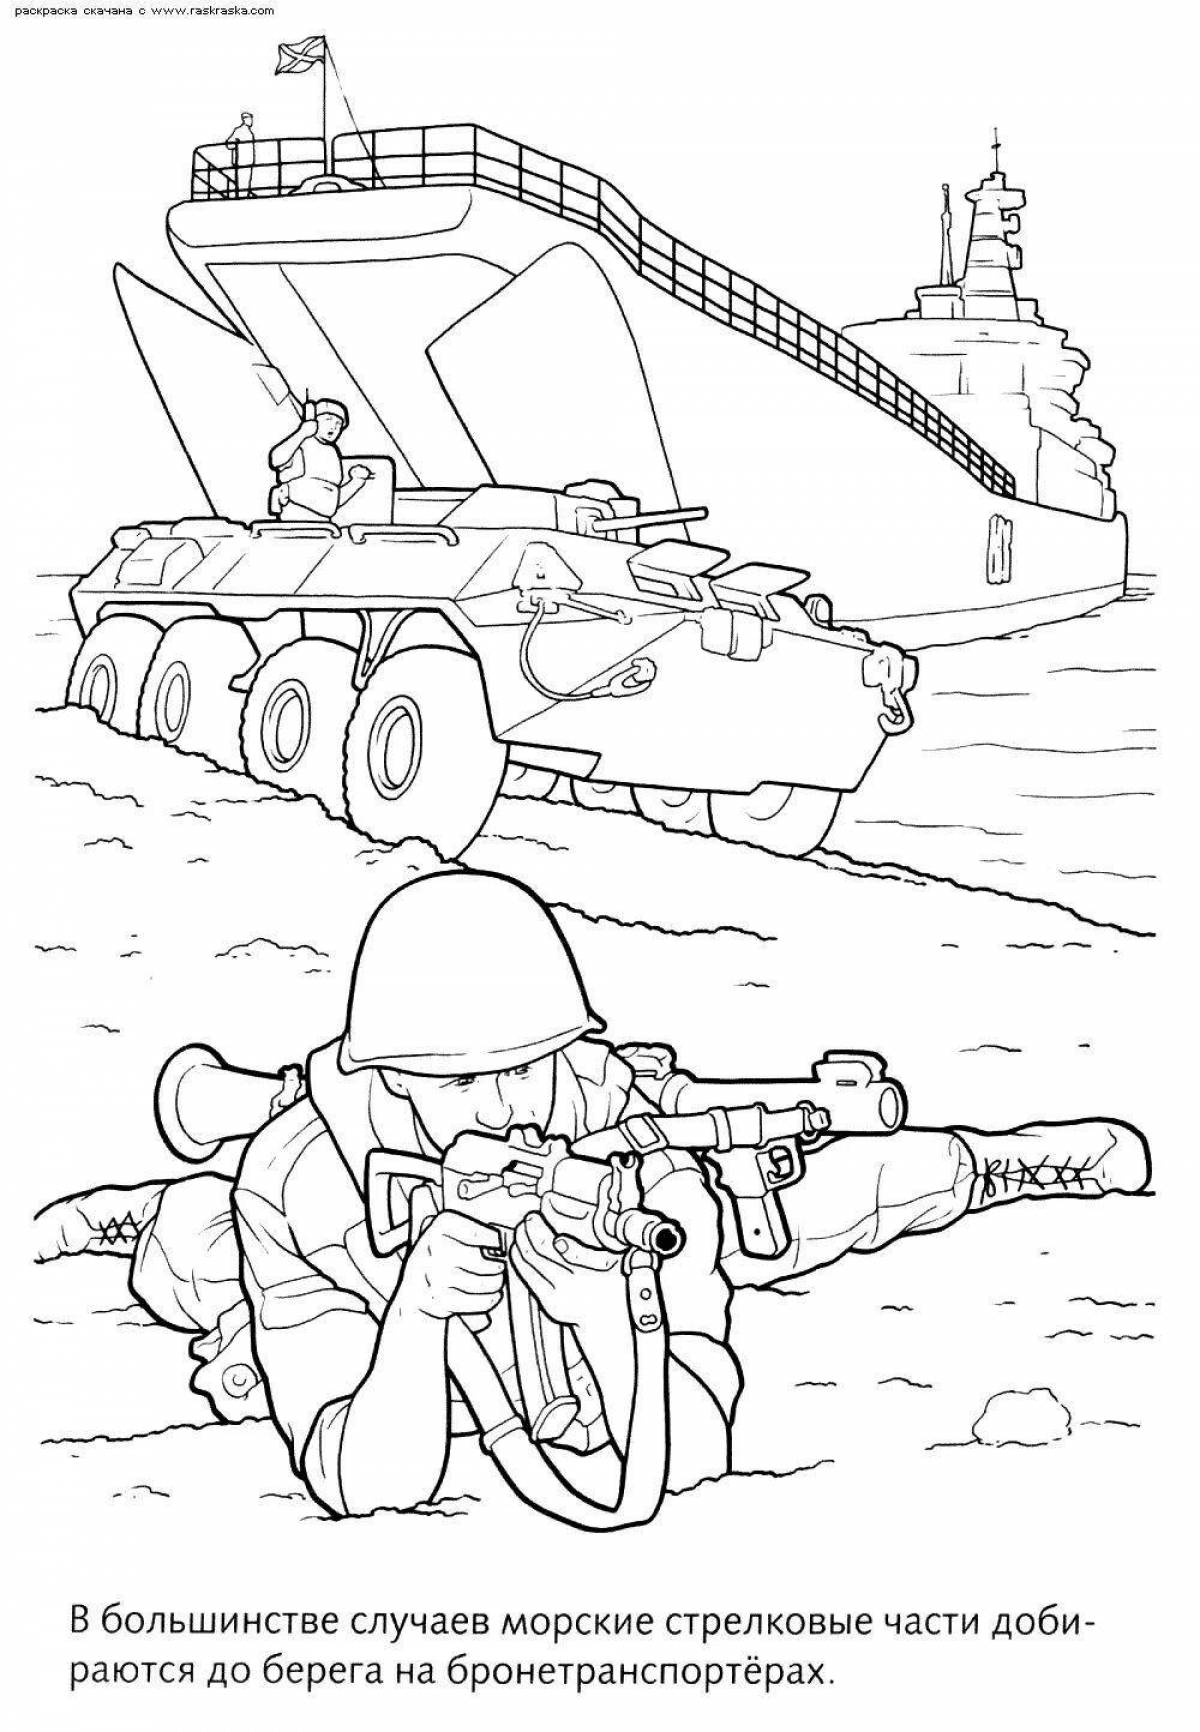 Colorful military coloring for kids